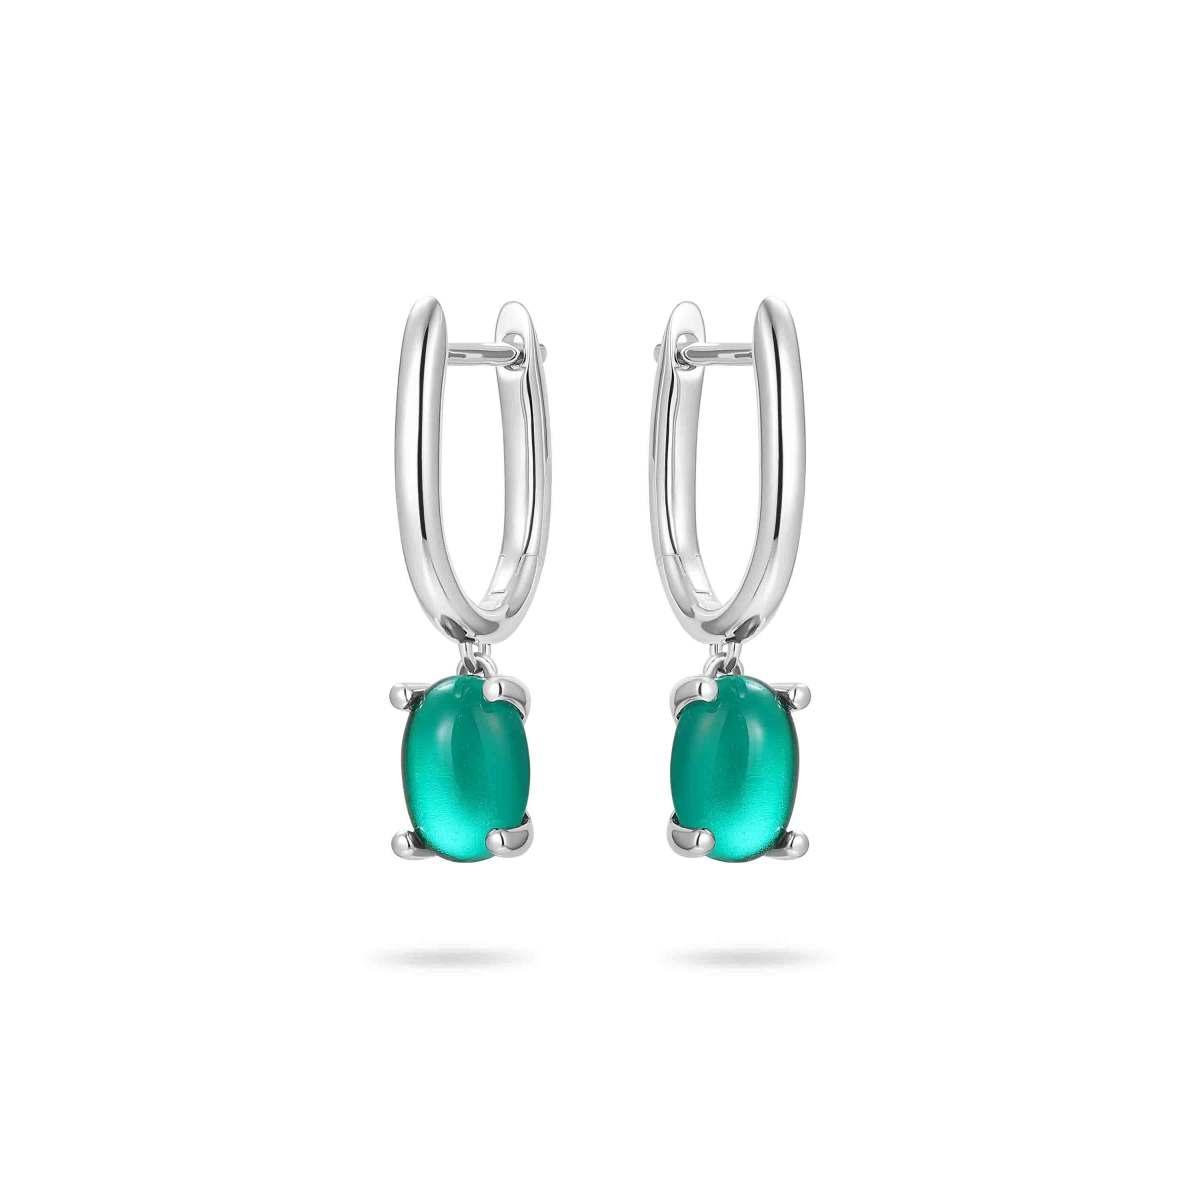 Sterling Silver Hoop Earrings with a Blue Green Charm - Rococo Jewellery